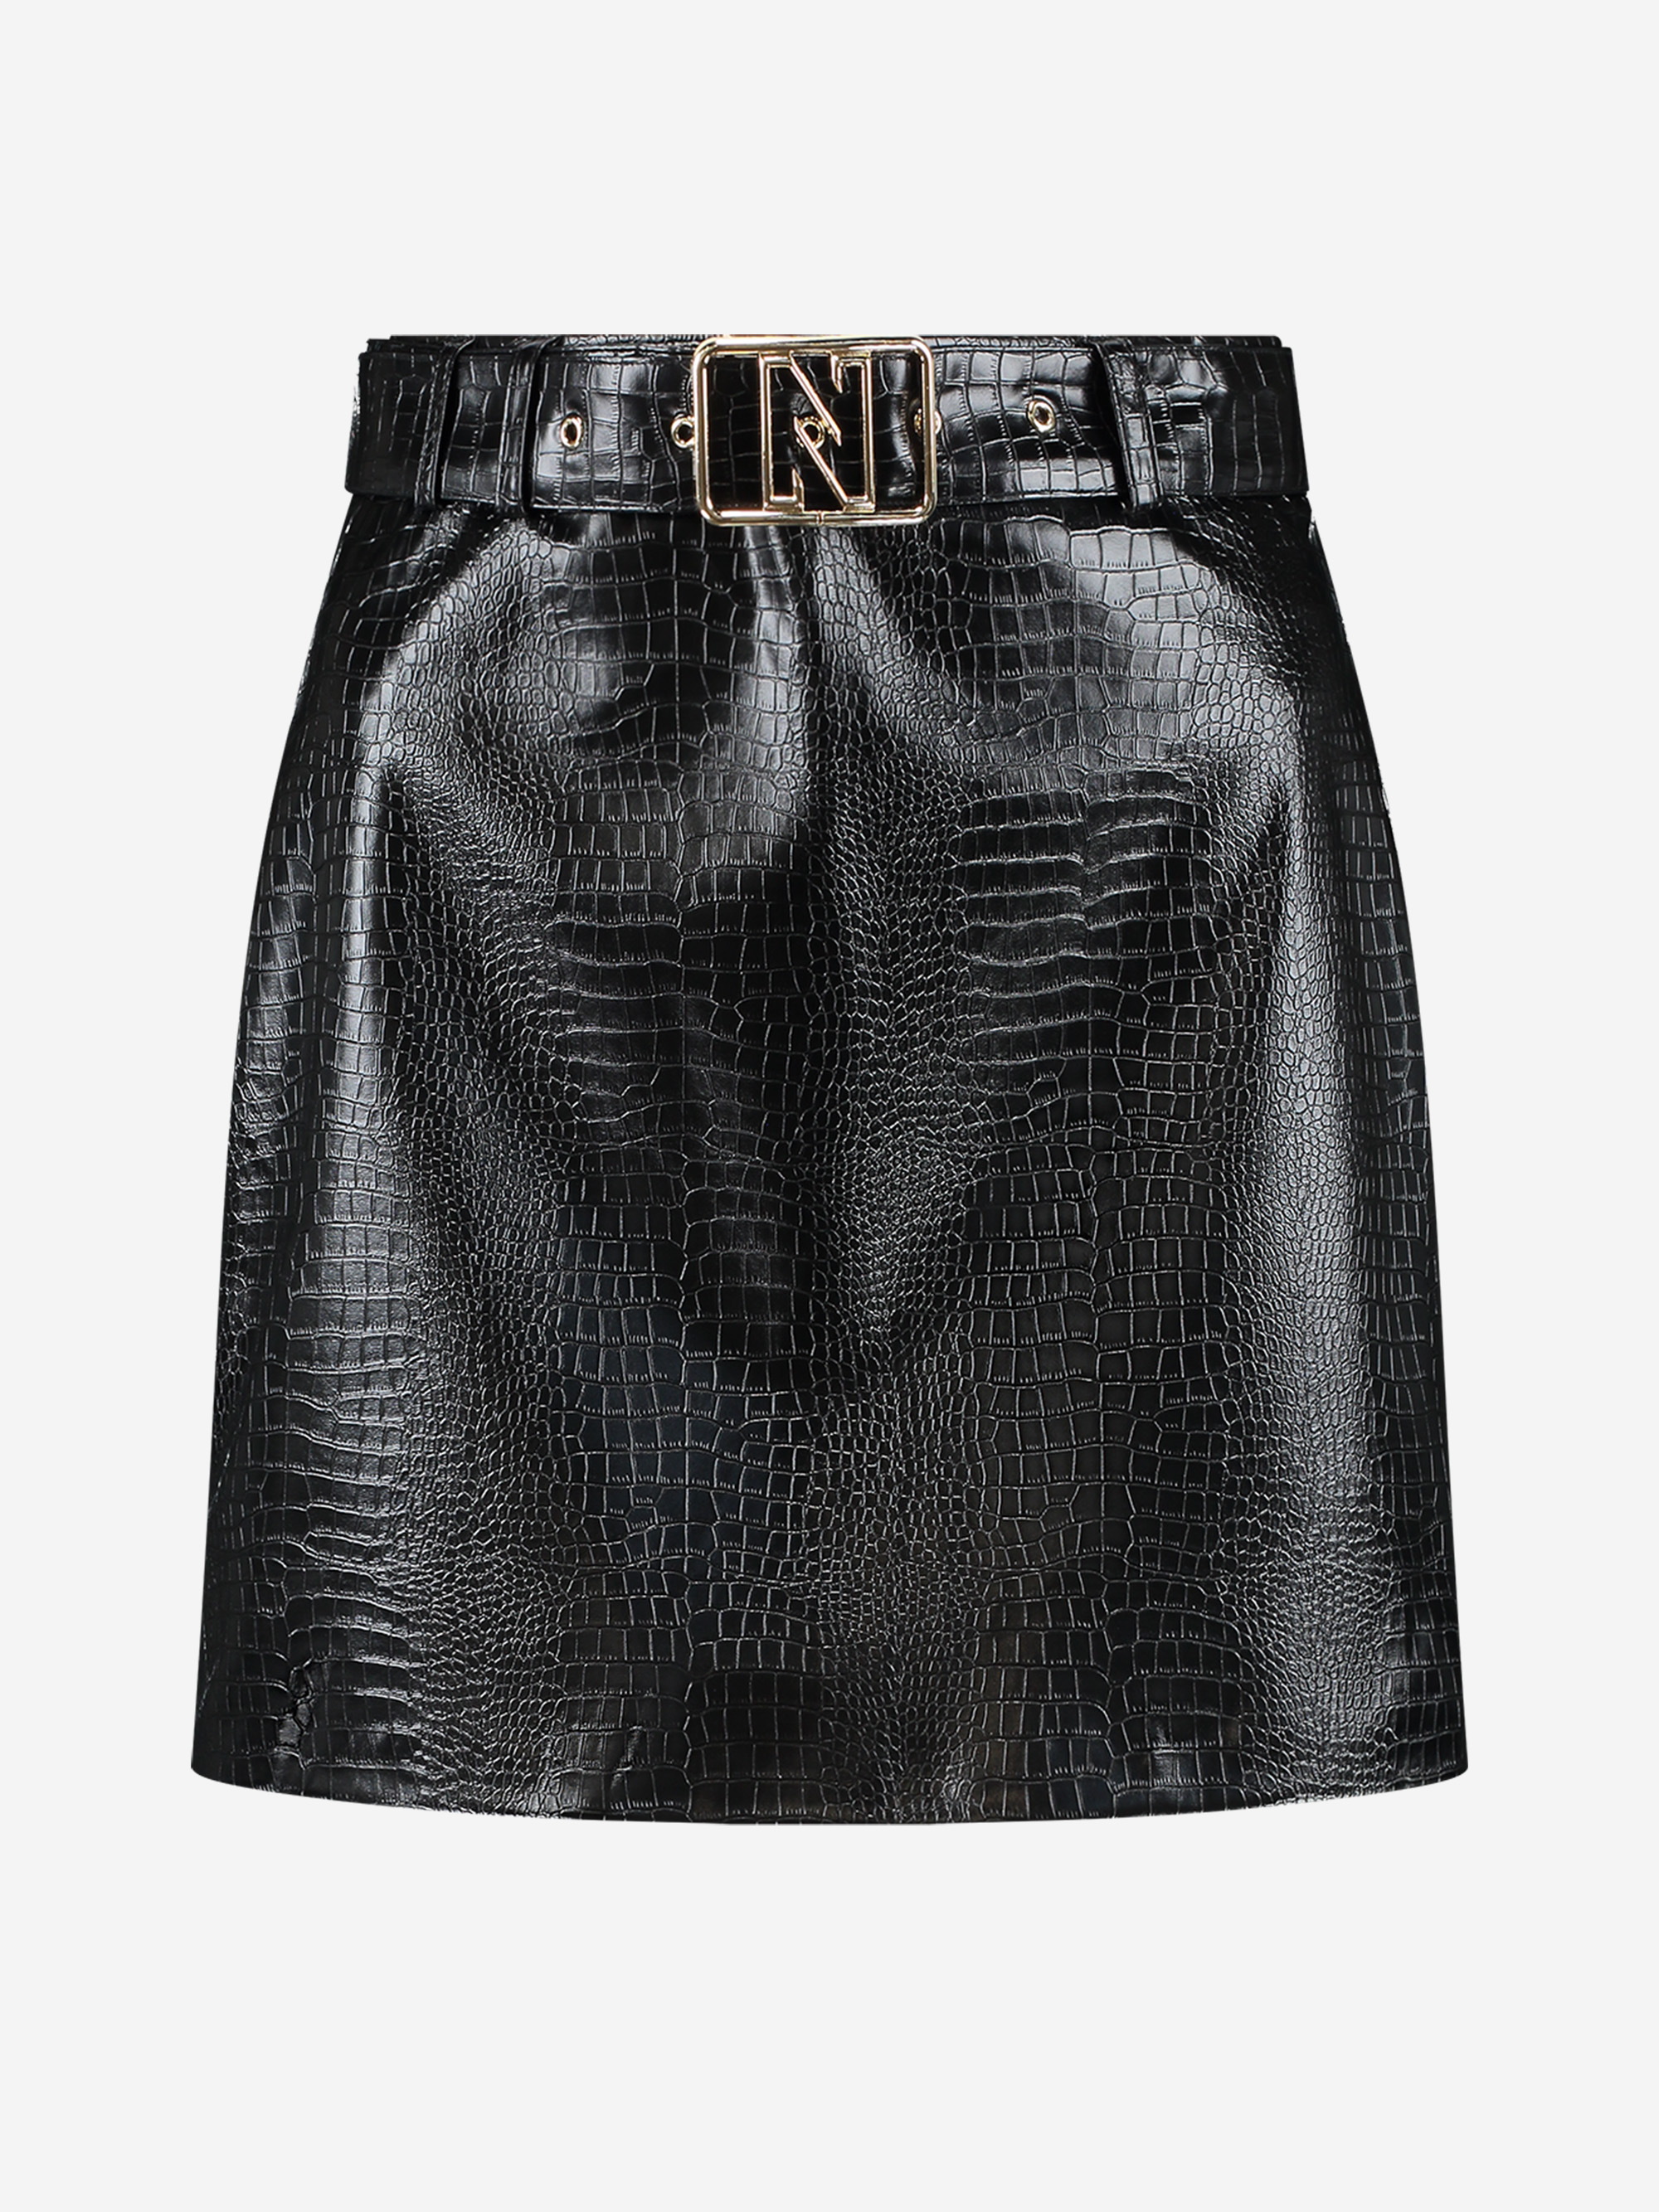 Patent leather skirt